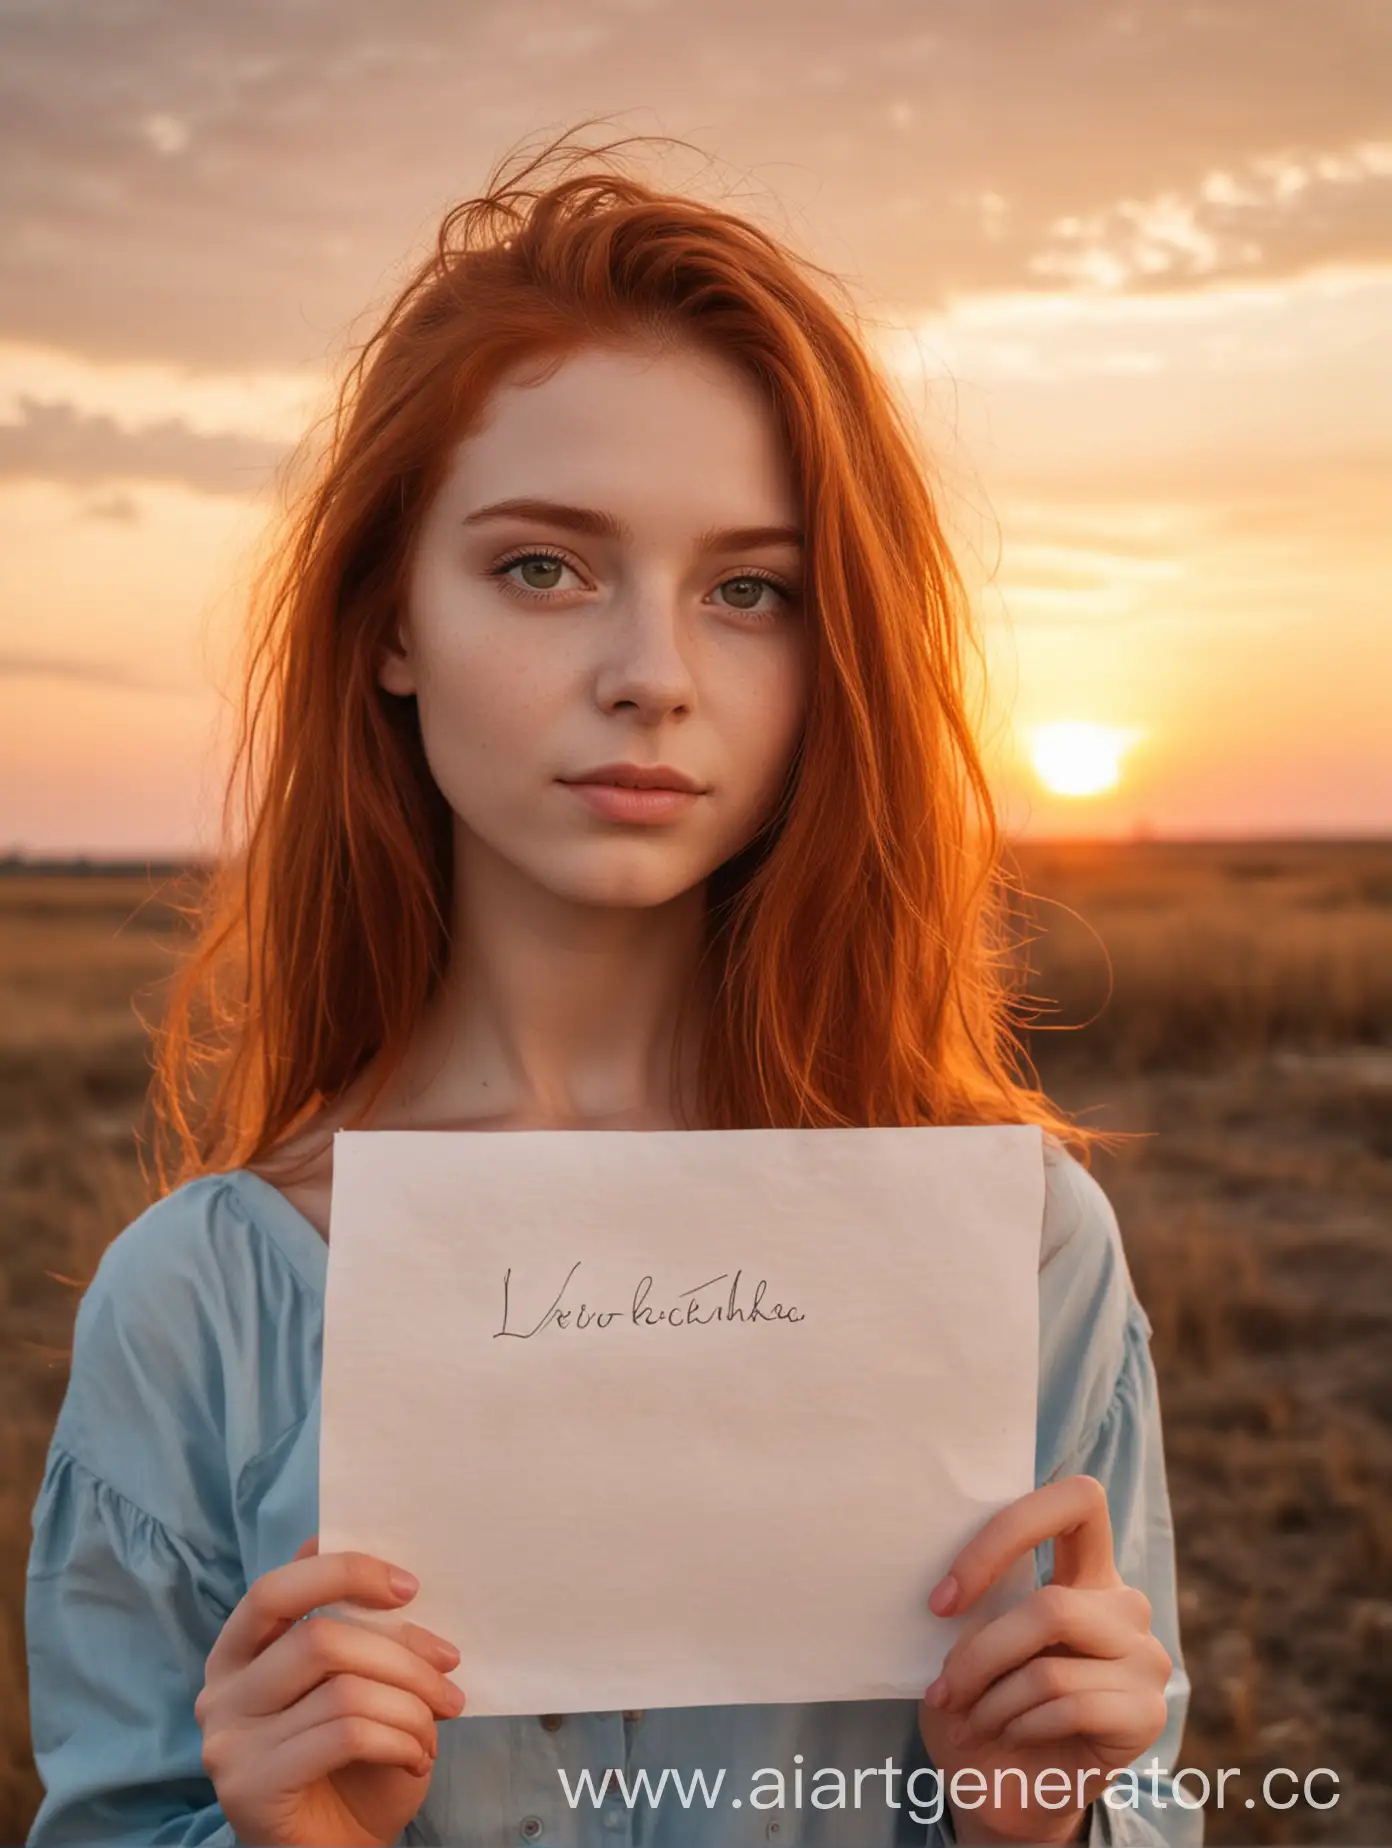 Redhead-Girl-Holding-Lerochka-is-the-Best-at-Sunset